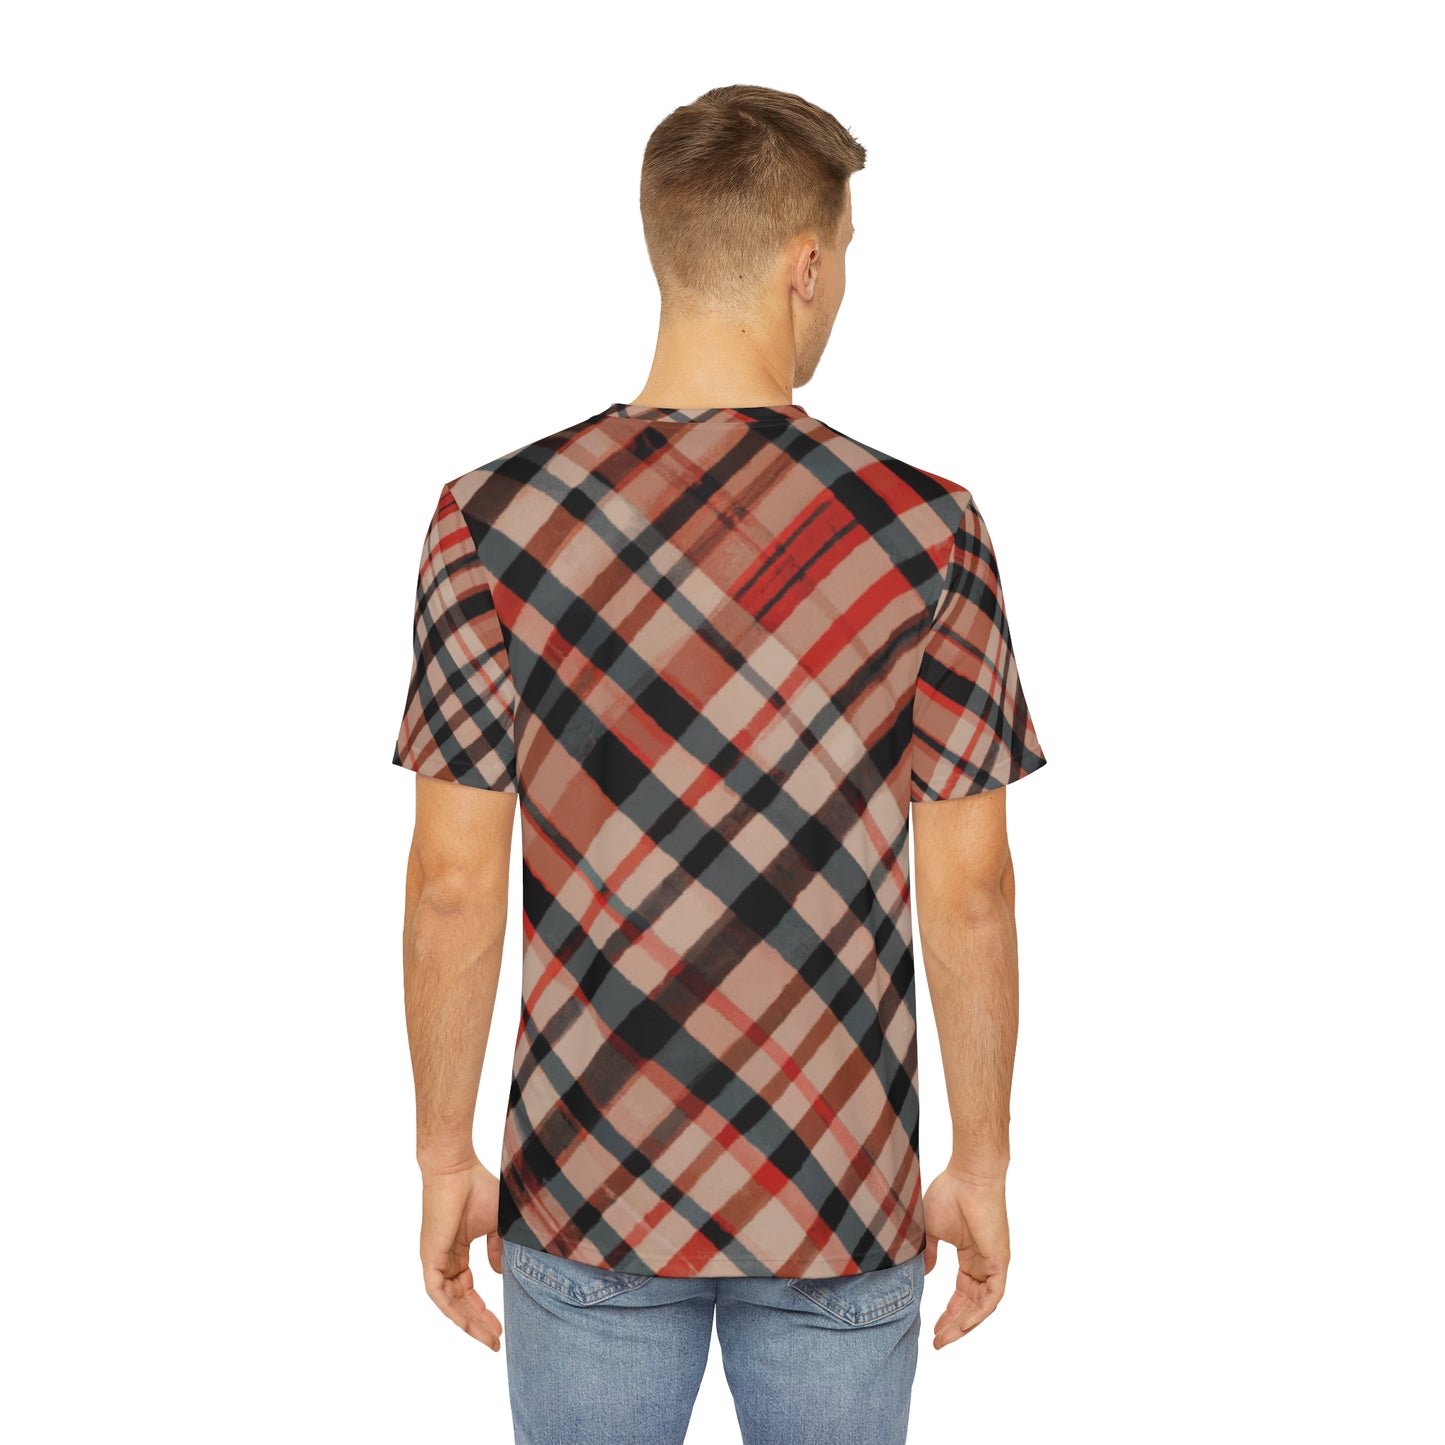 Back view Highland Ember Clash Crewneck Pullover All-Over Print Short-Sleeved Shirt red black beige brown plaid pattern paired with casual denim pants worn by a white man